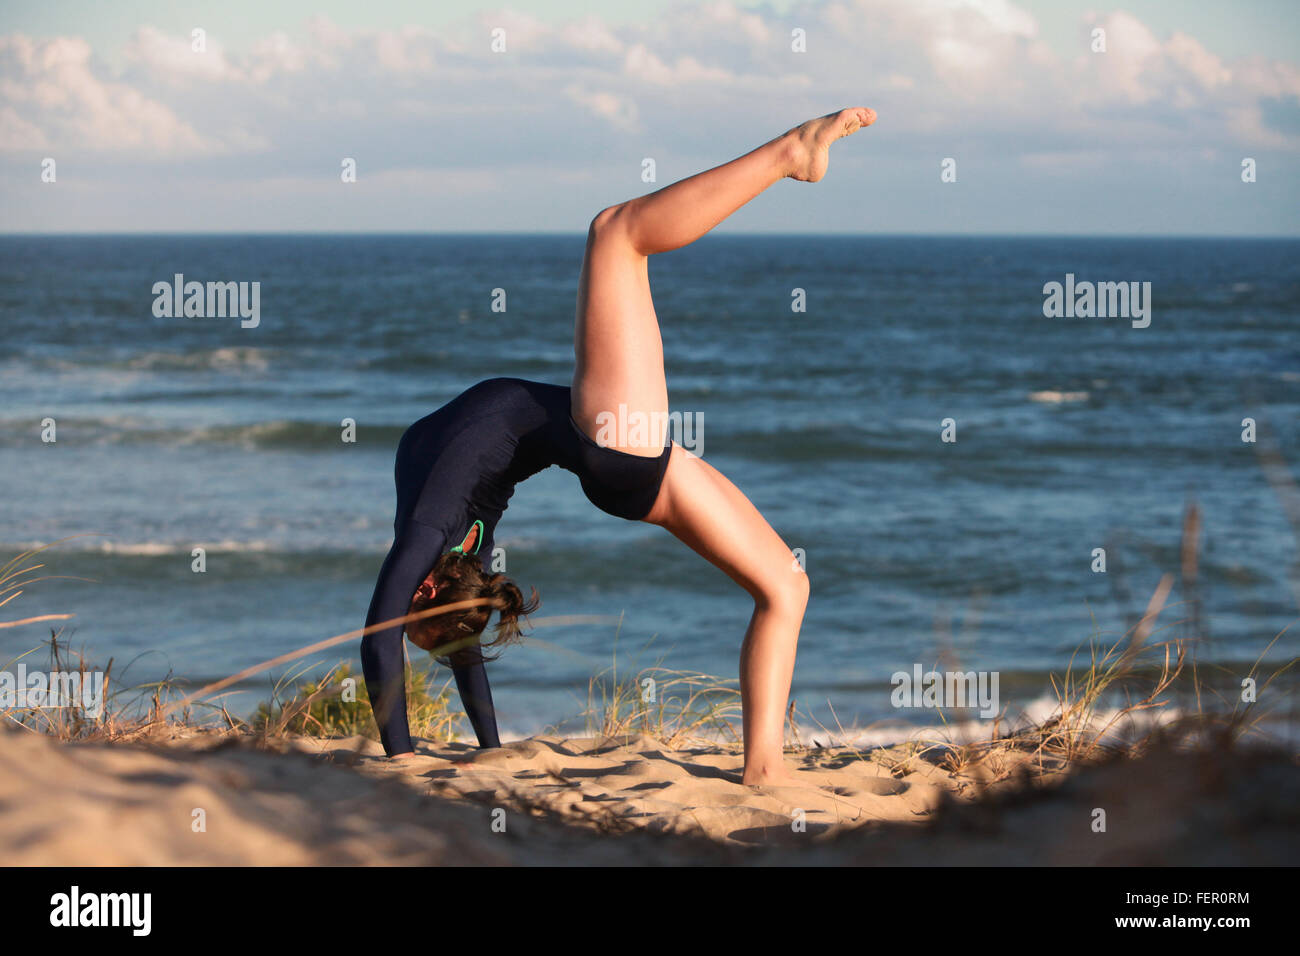 A gymnast is doing her routine on the beach in South Africa. Stock Photo